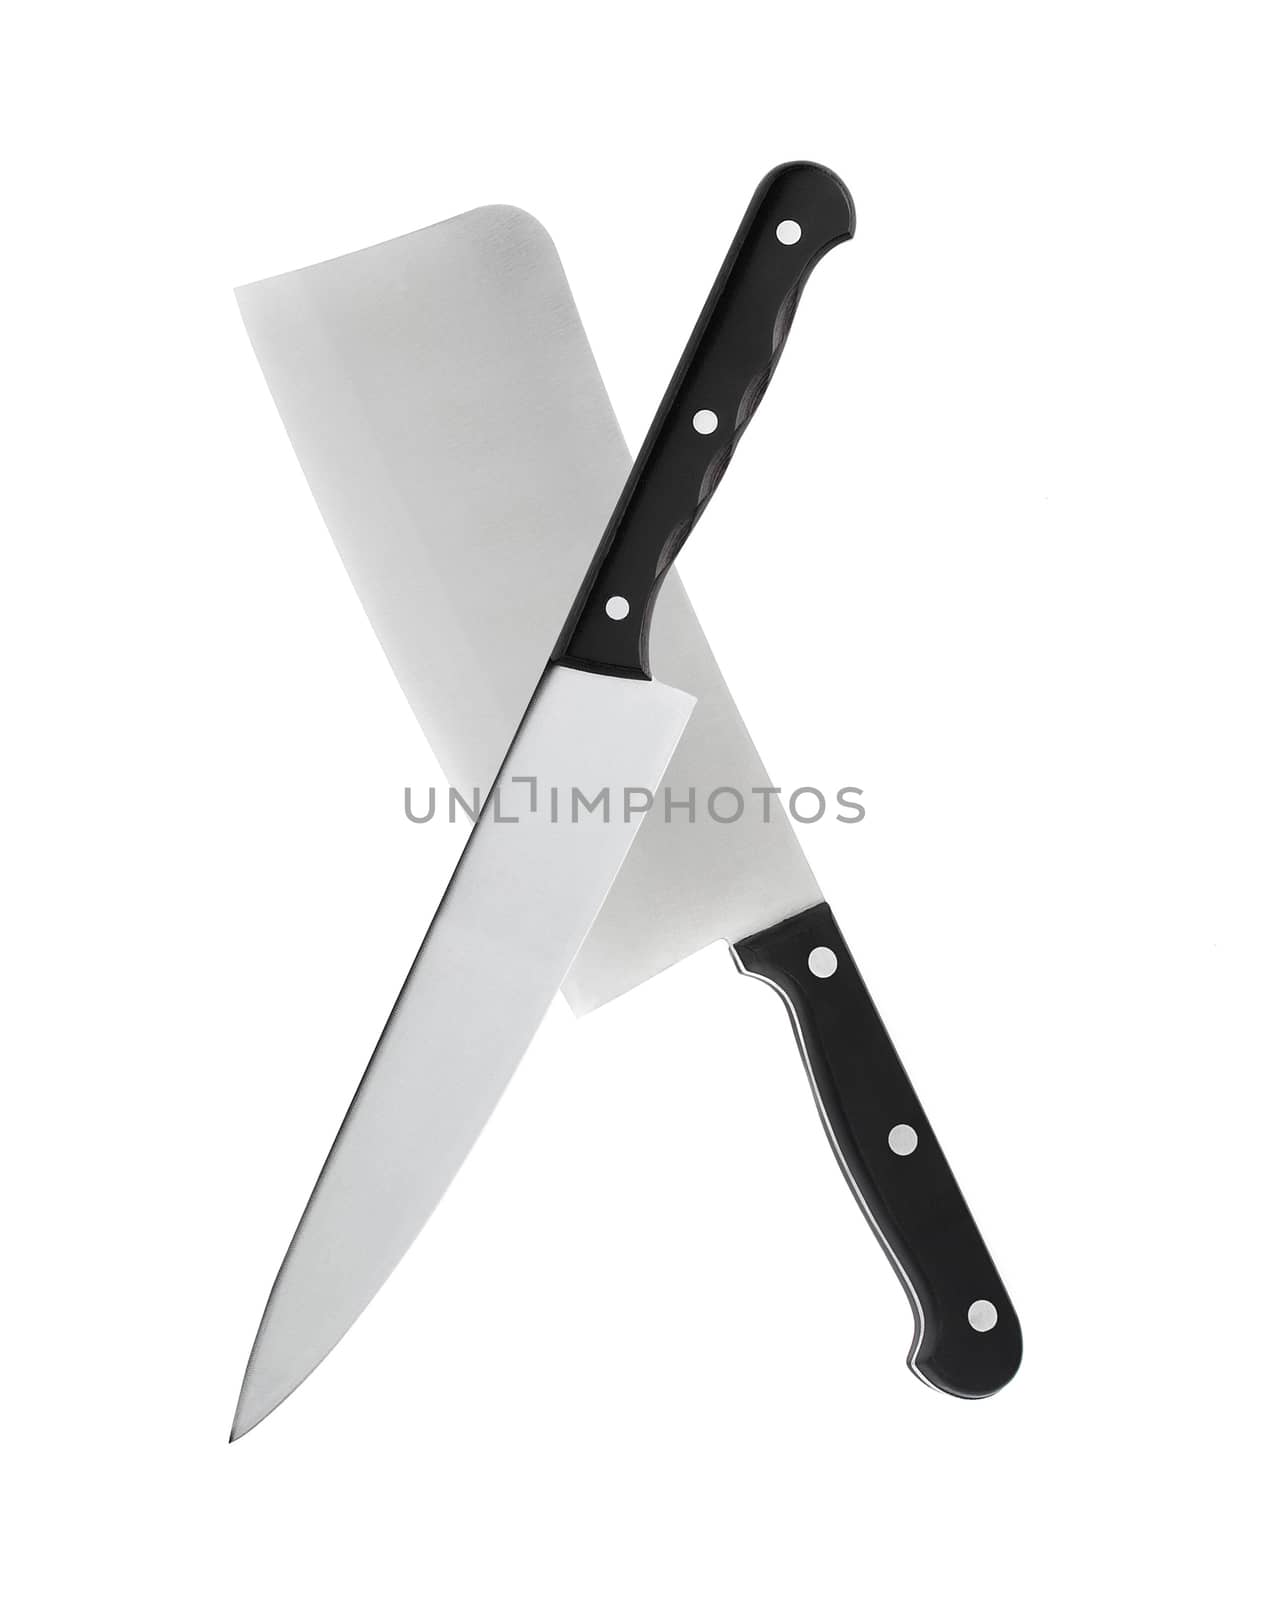 Big knife with black handle on a white